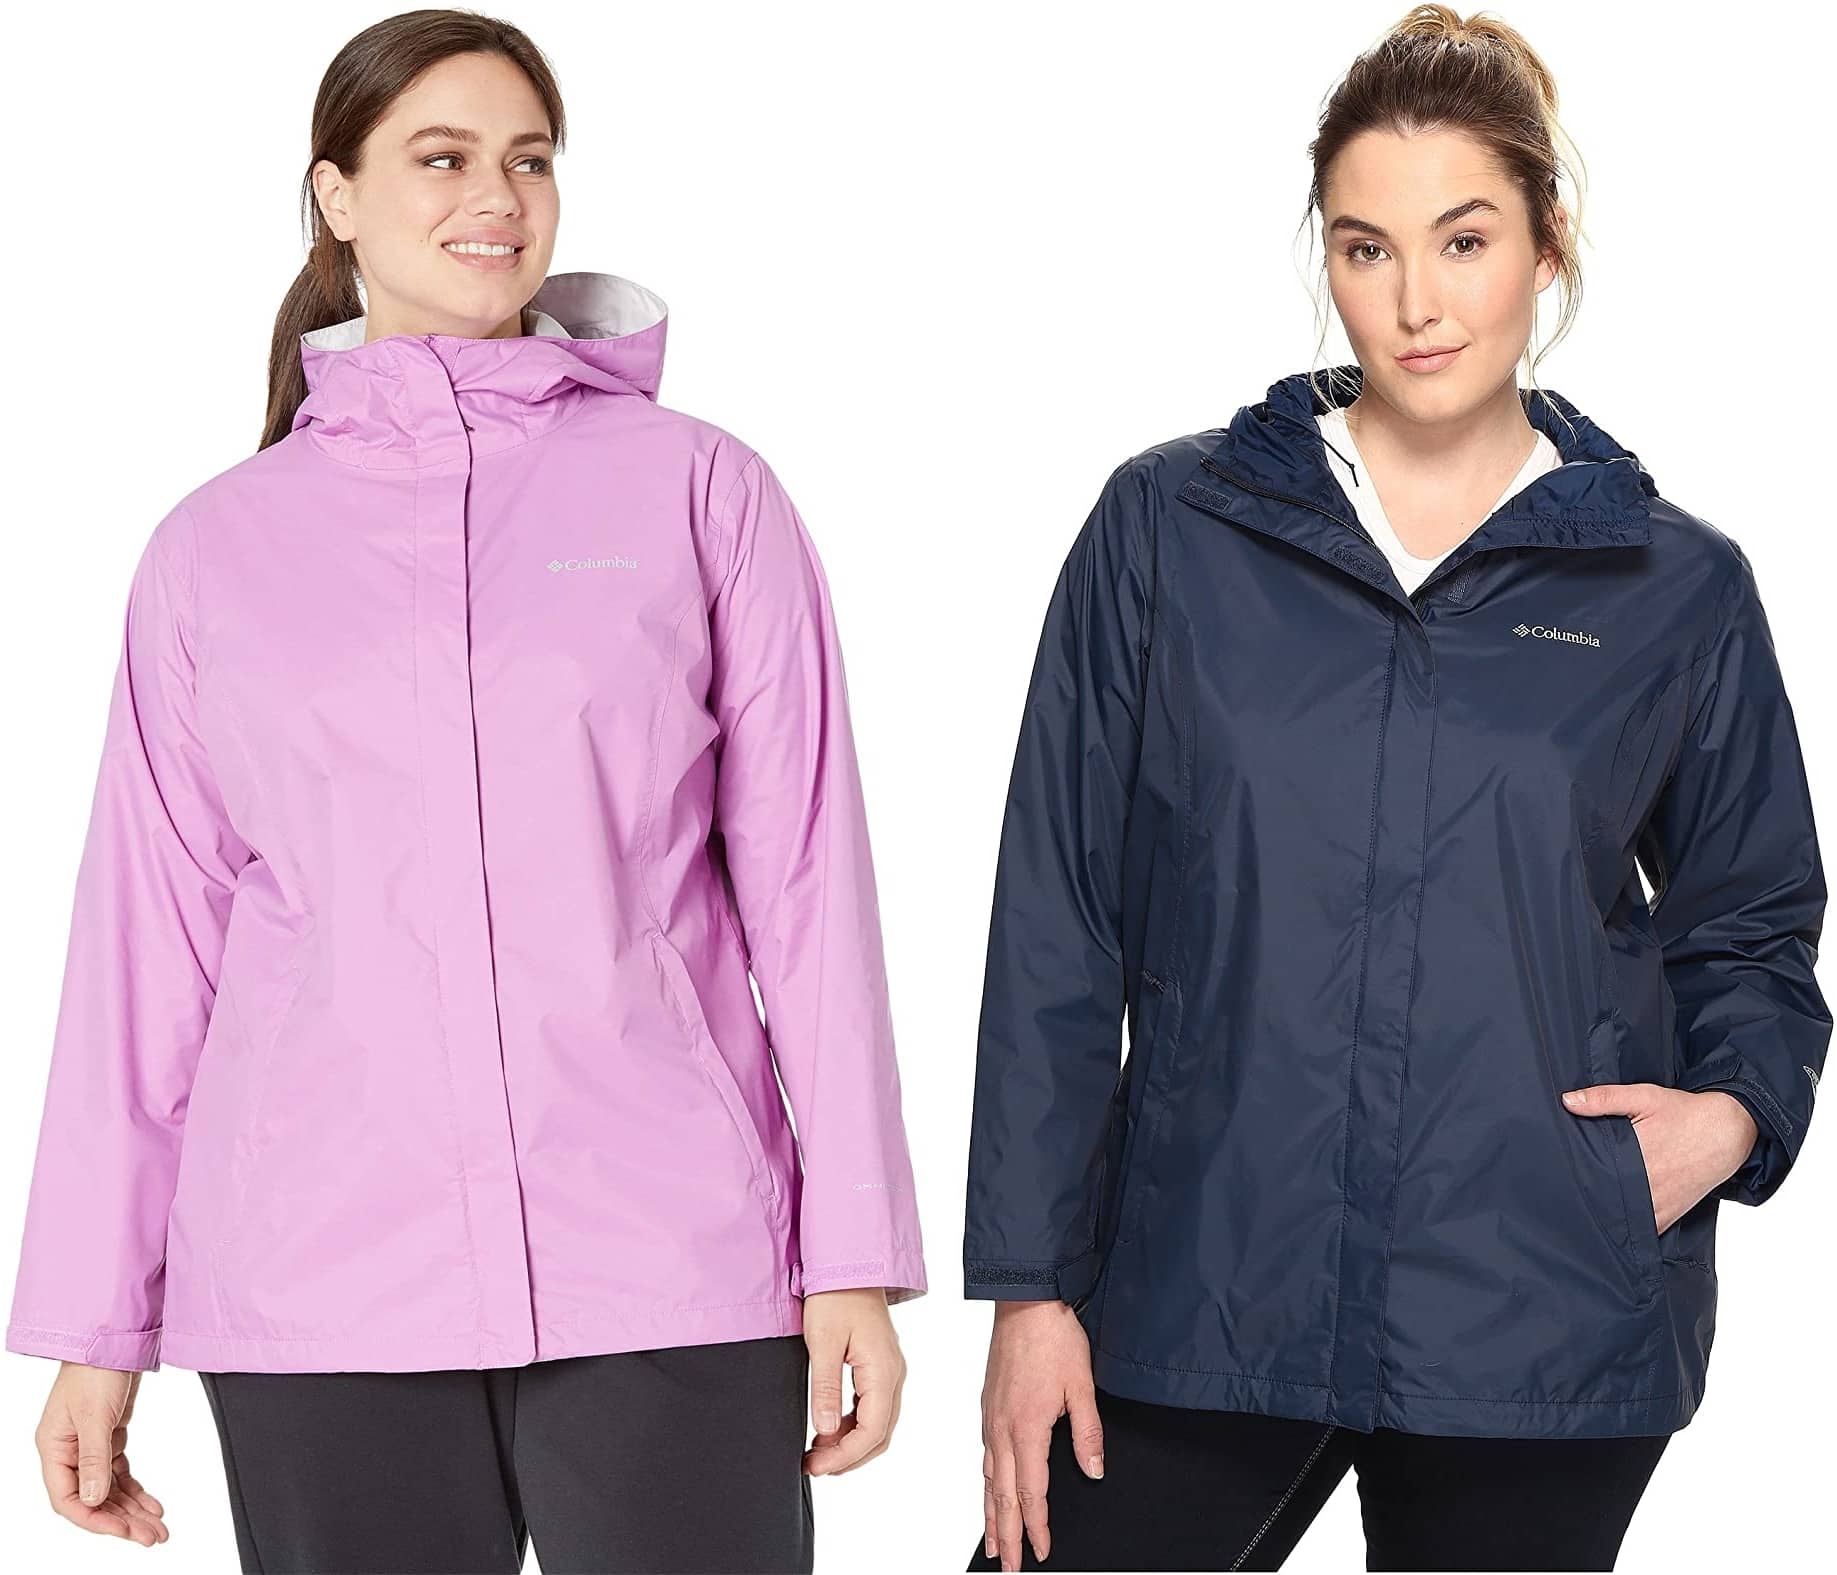 This rain jacket has the fully waterproof protection you need whether you're facing Atlantic downpours on the Eastern Seaboard or a gentle, mid-hike sun shower